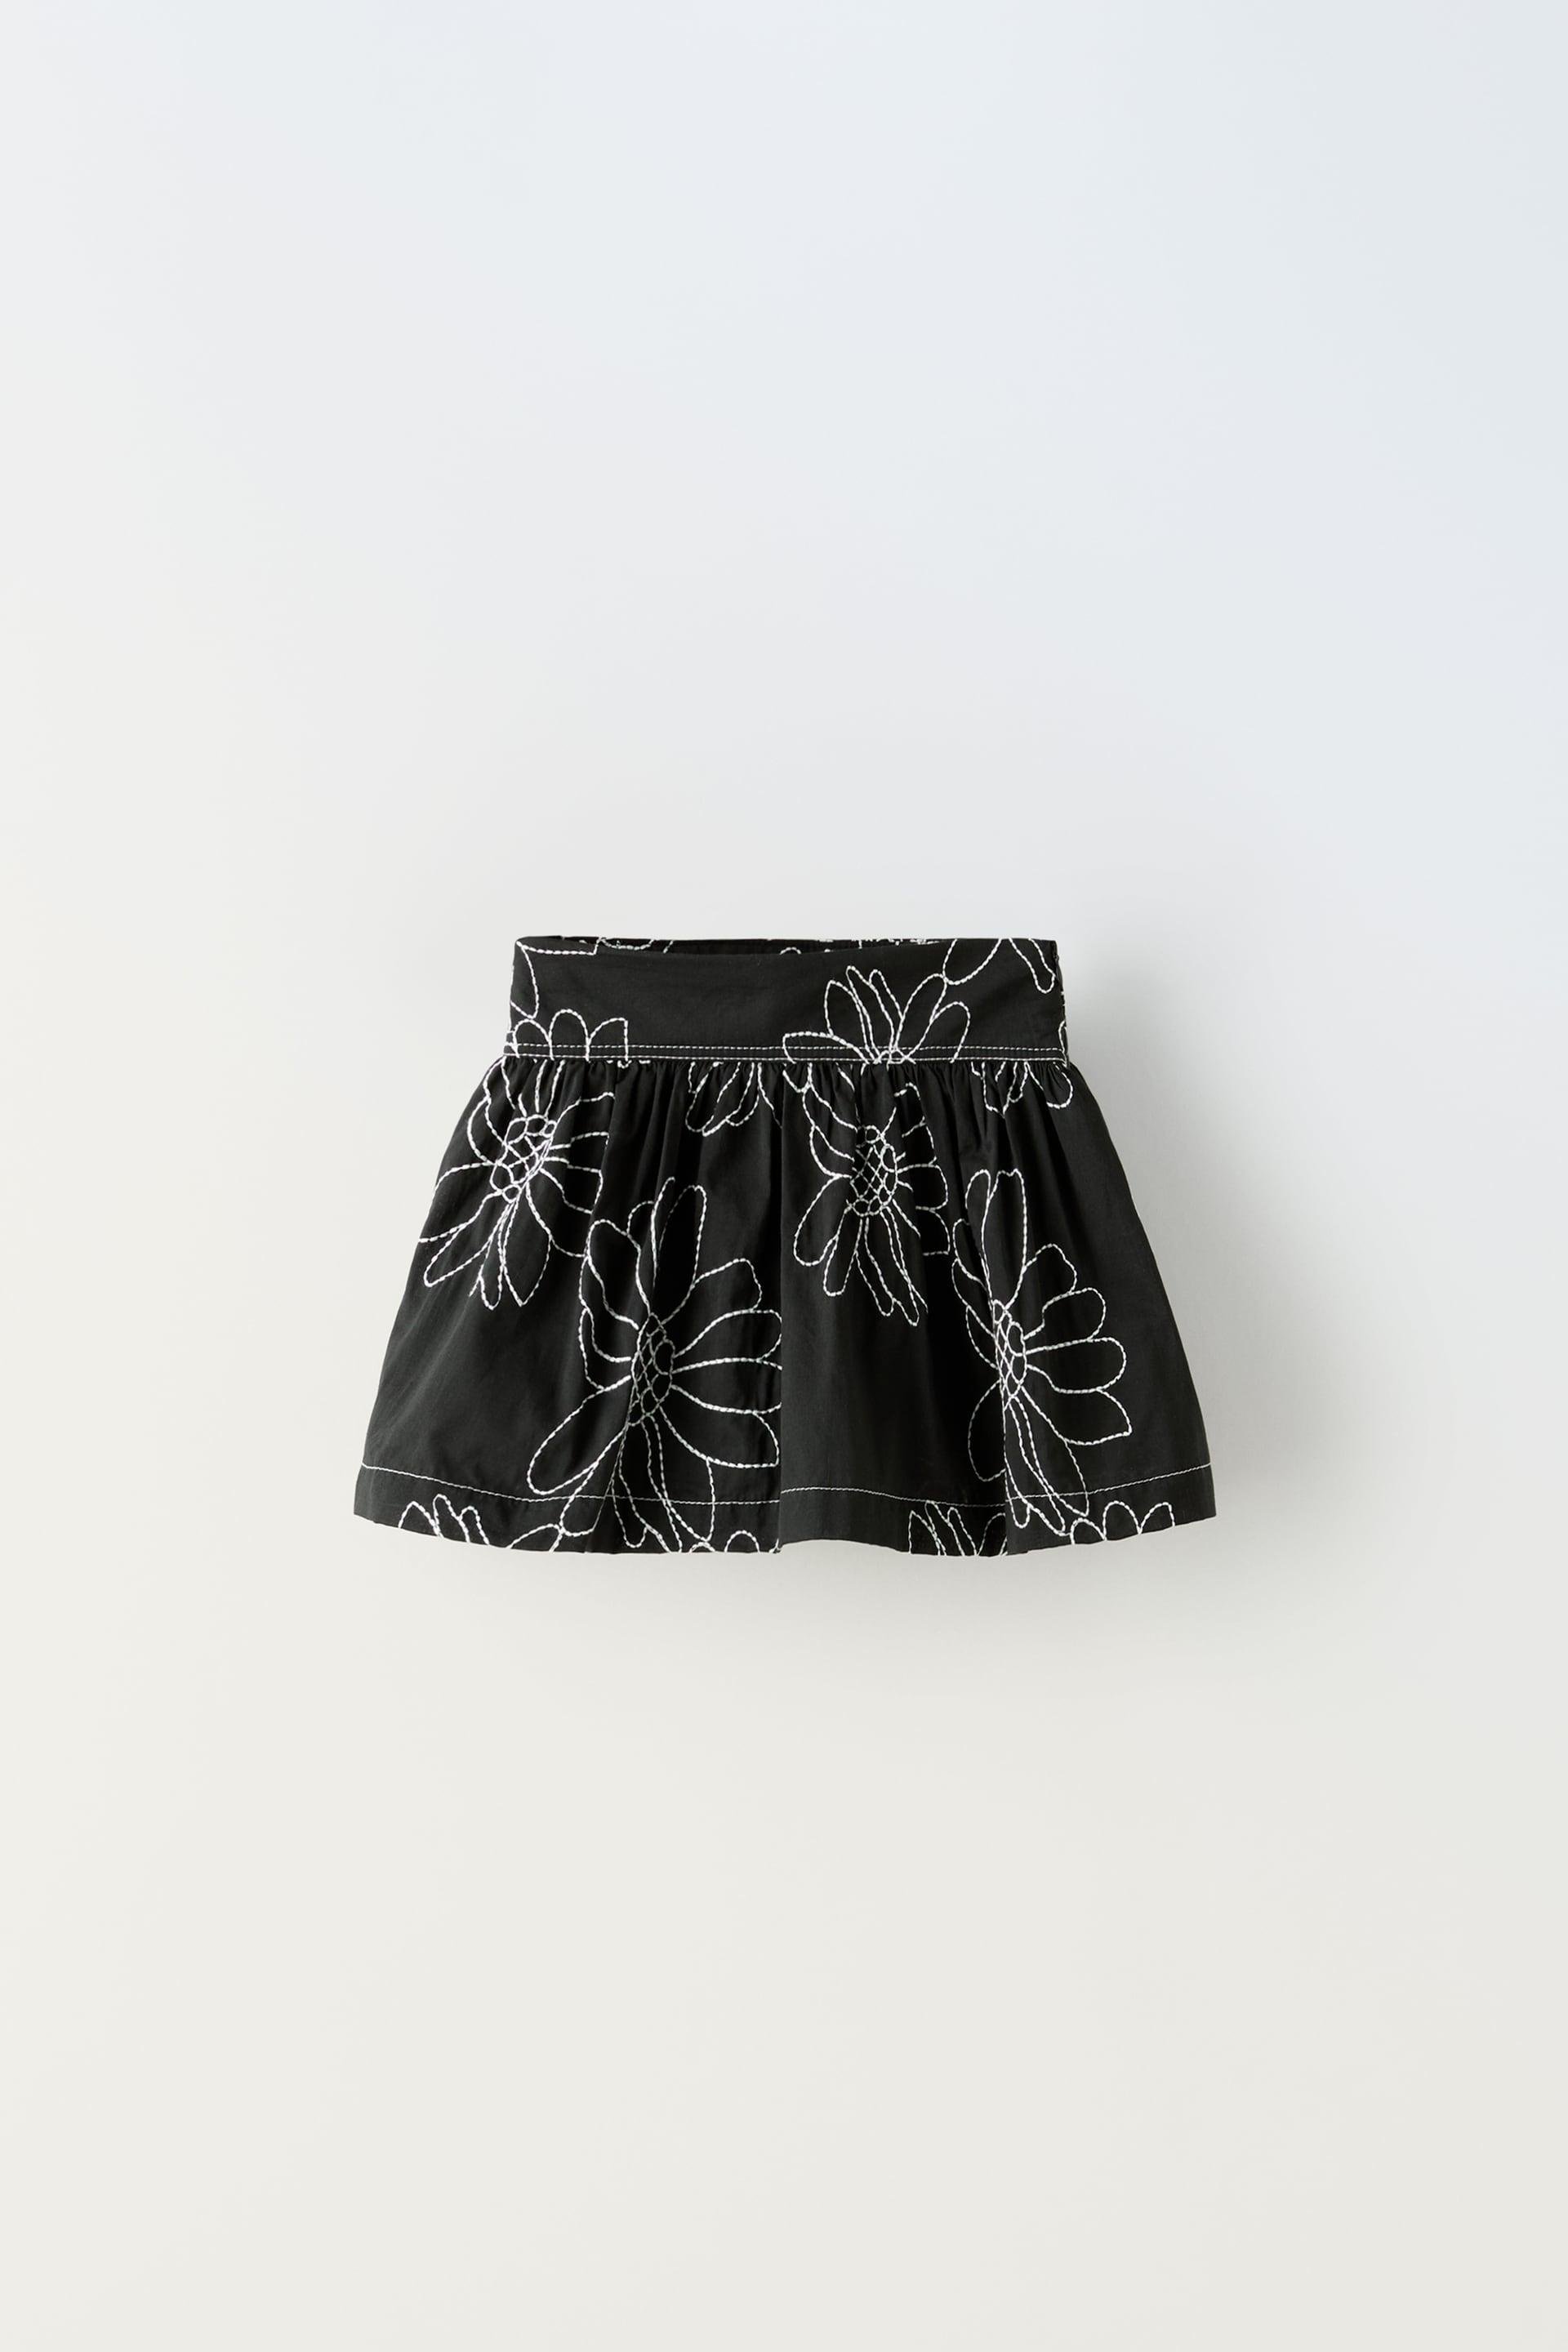 FLORAL EMBROIDERY SKIRT by ZARA